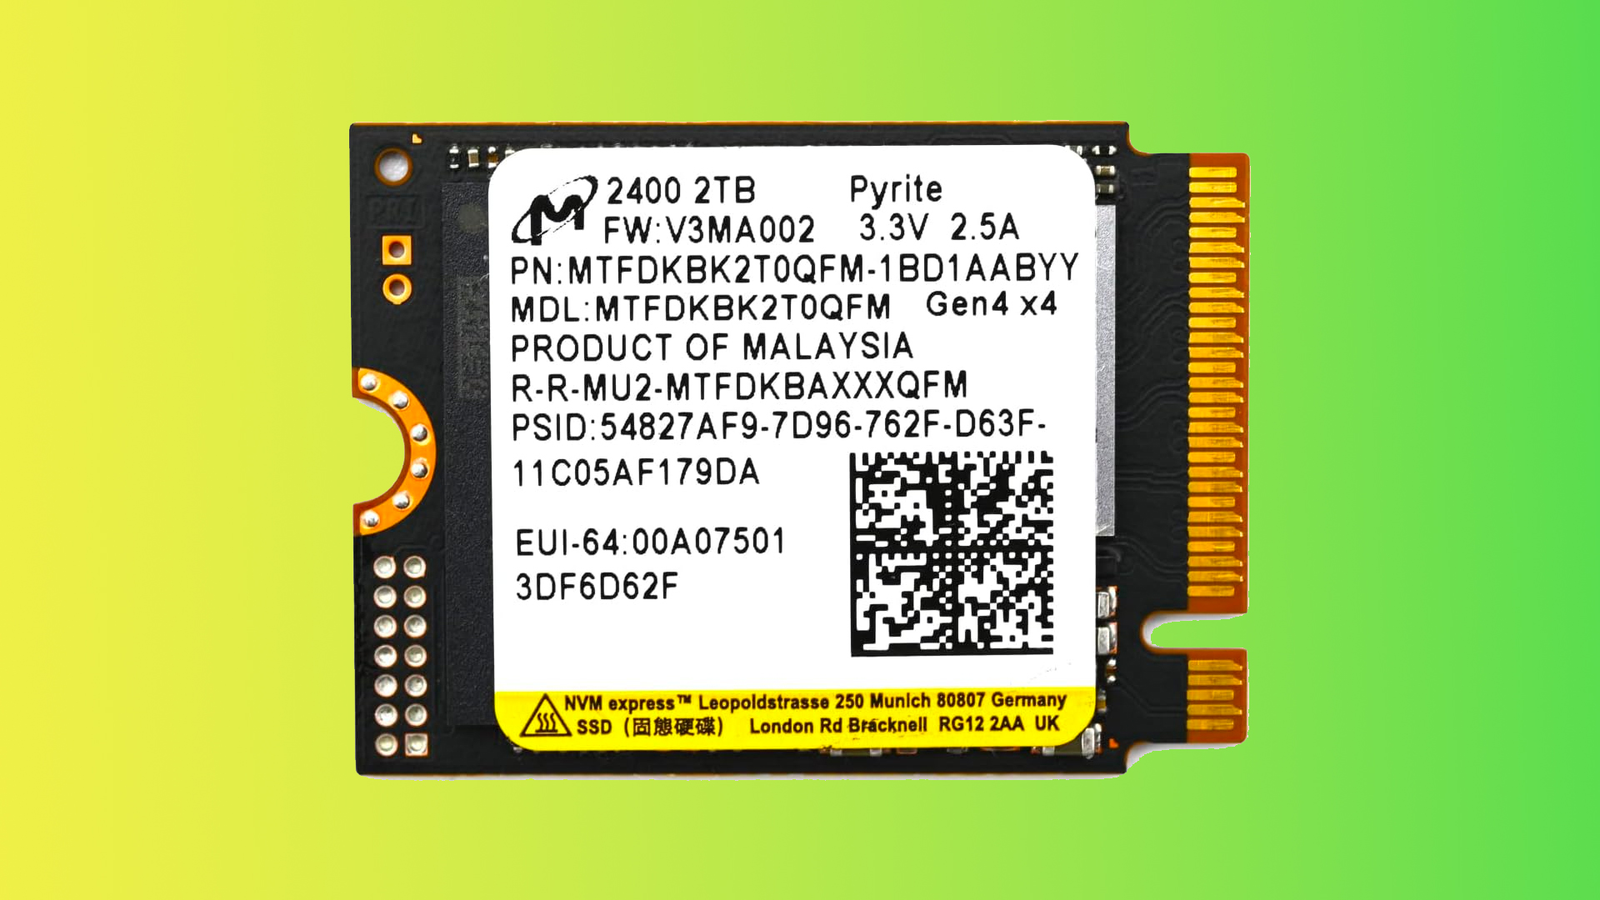 This 2TB Micron M.2 2230 SSD is perfect for your Steam Deck, and